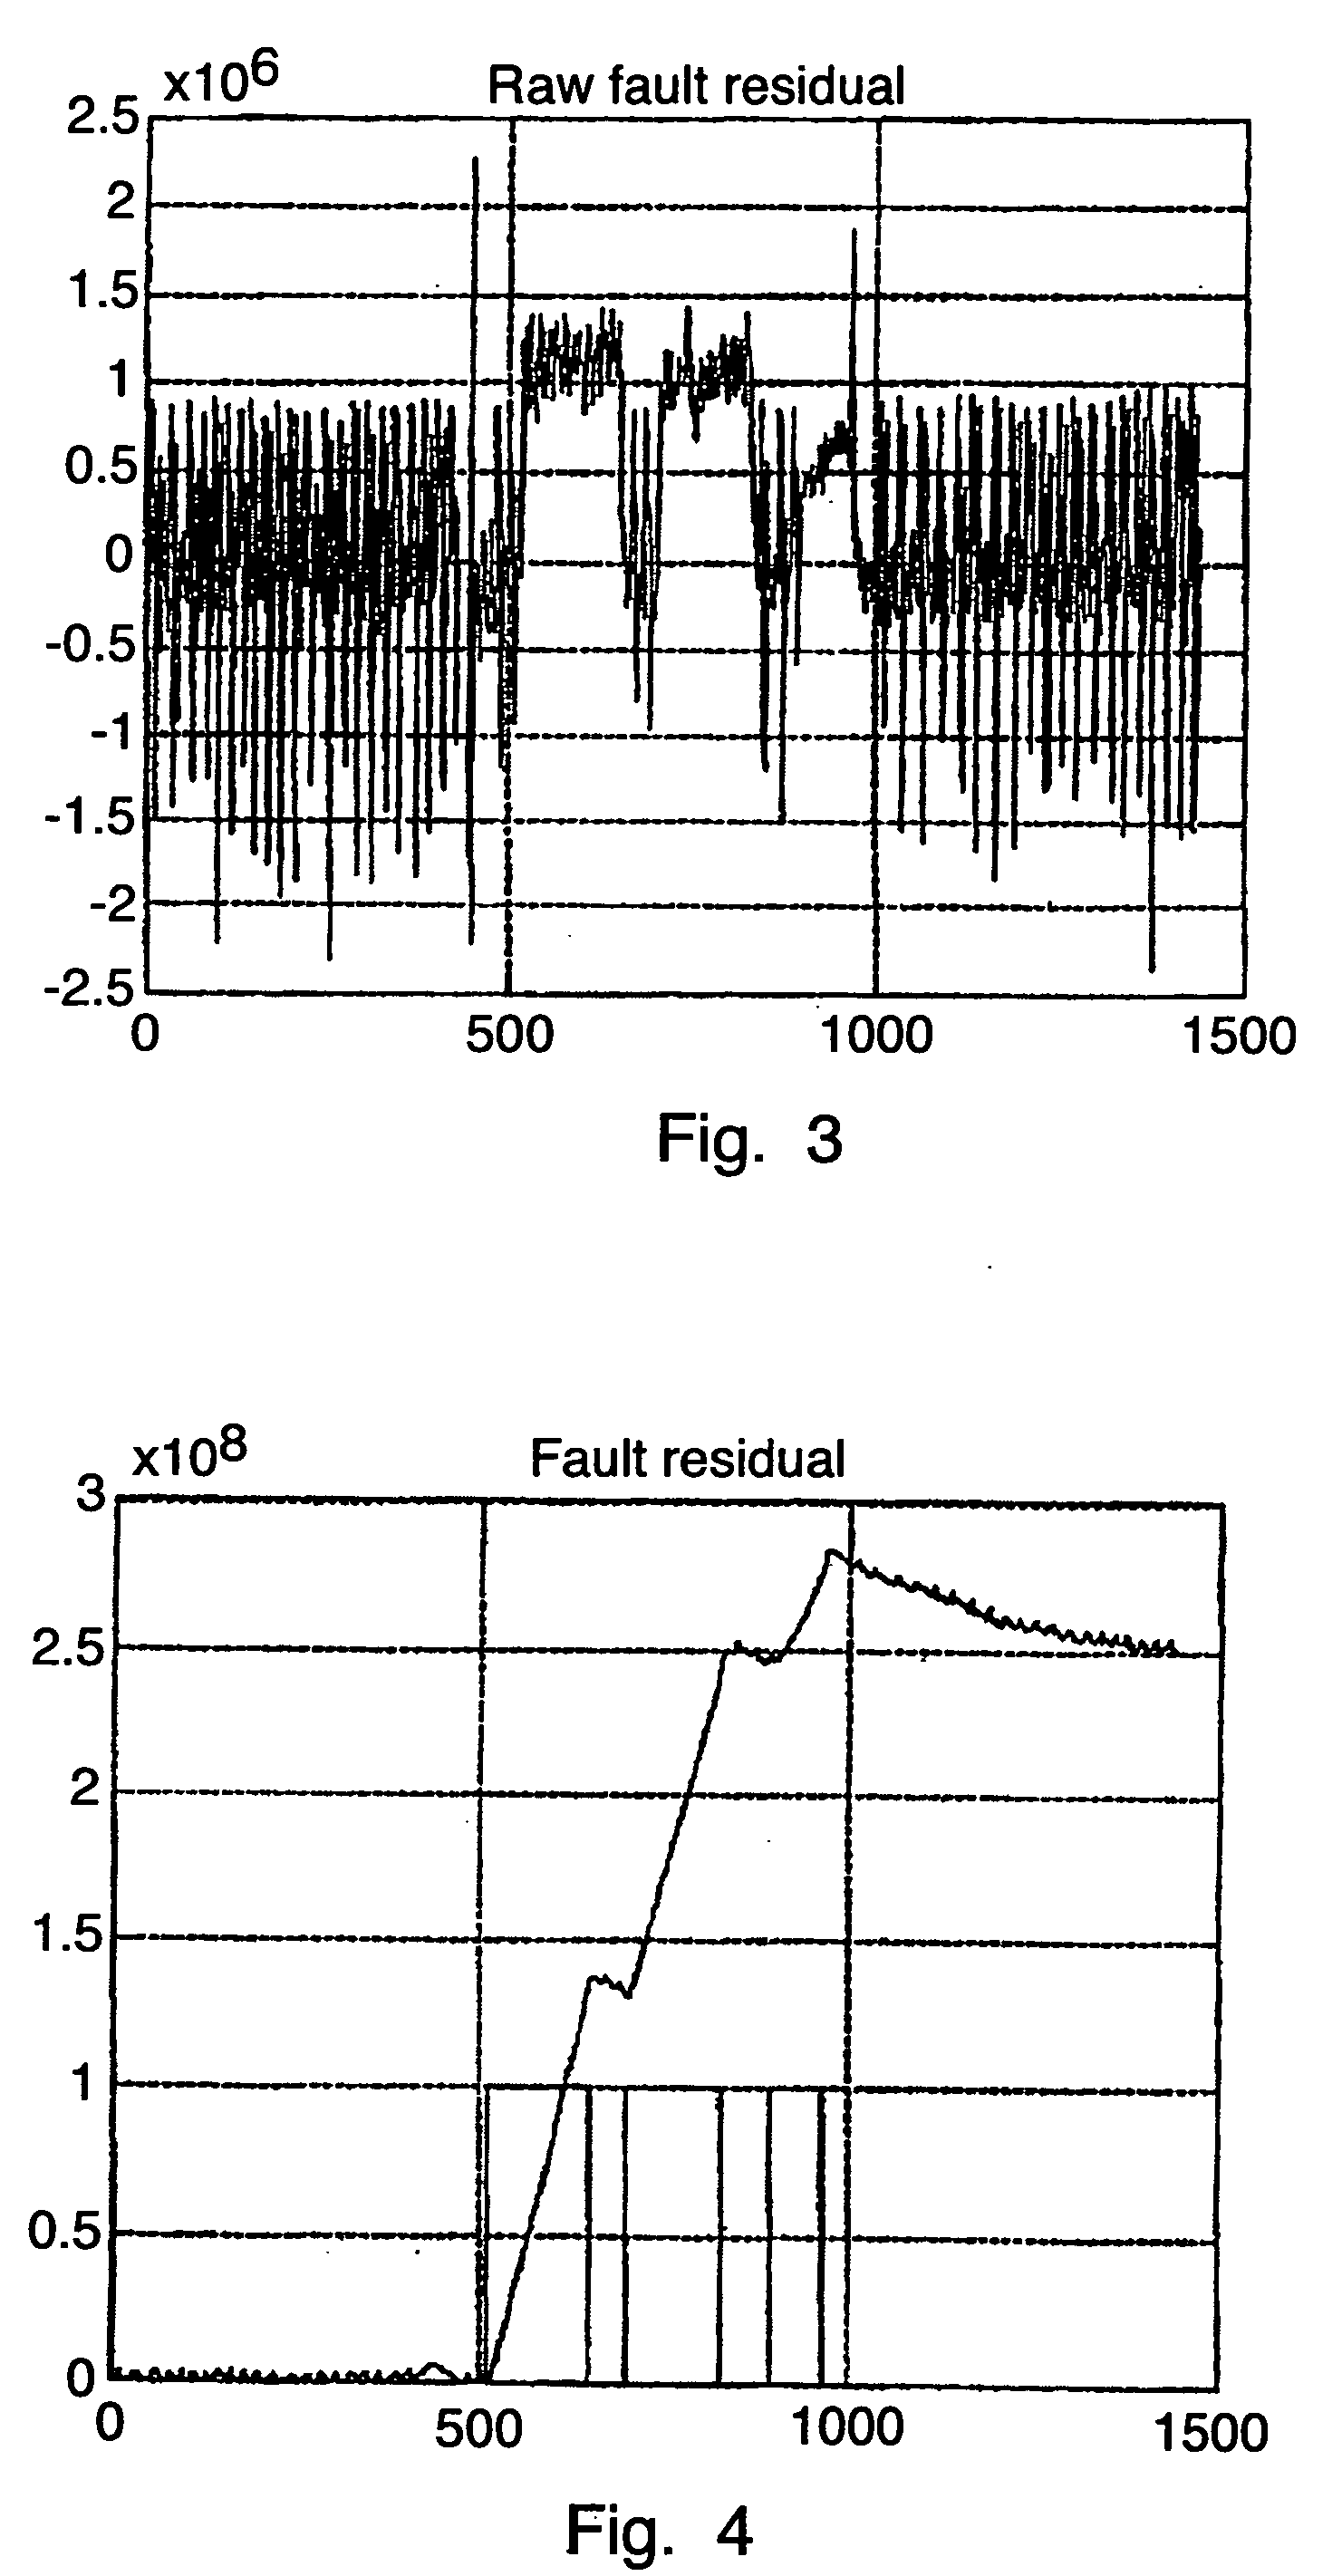 Method for detecting changes in a first flux of a heat or cold transport medium in a refrigeration system